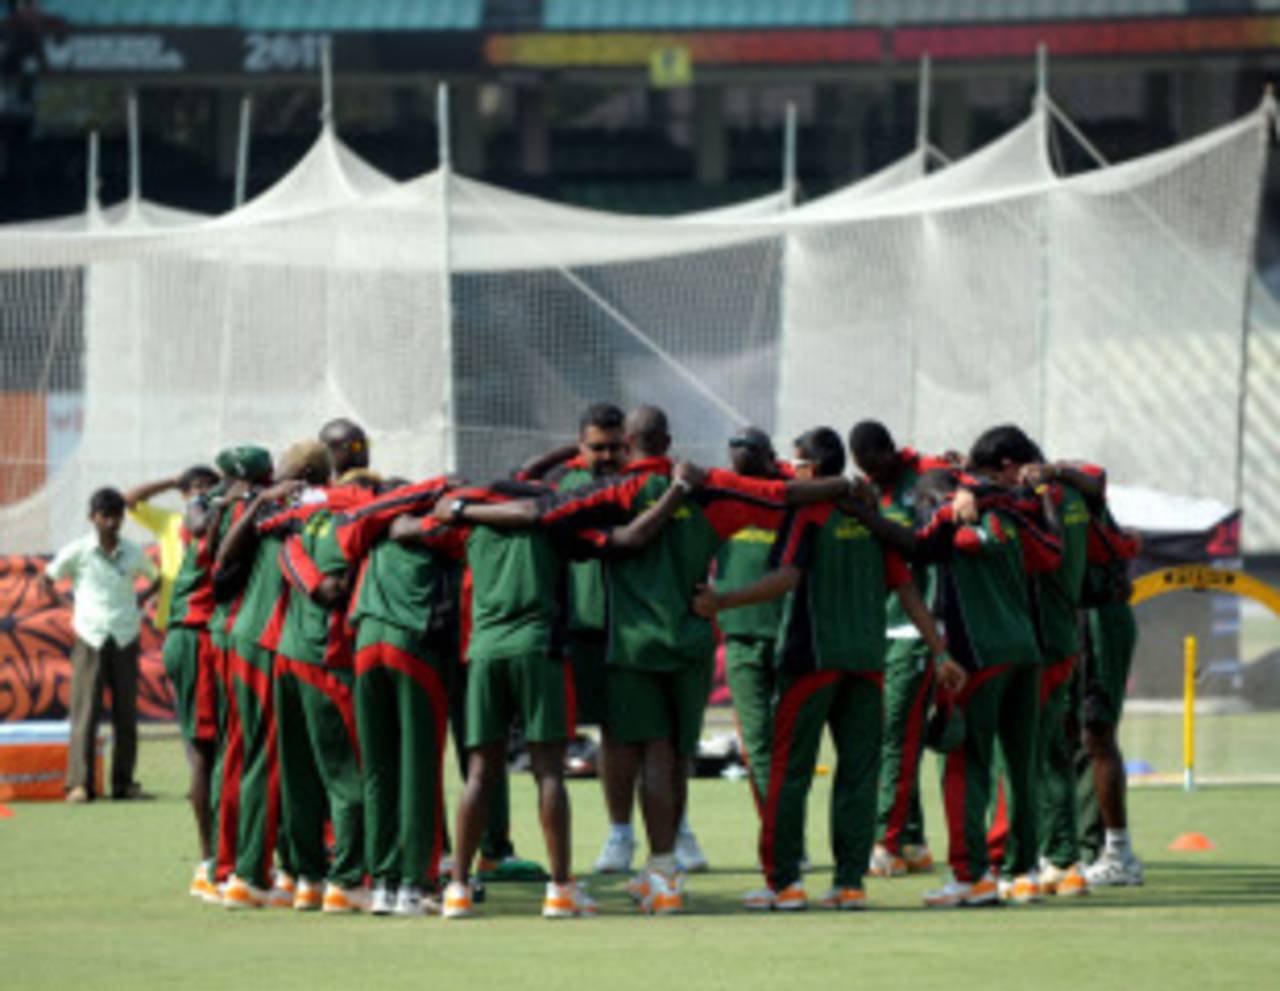 Kenya get into a huddle during practice ahead of their World Cup match against Zimbabwe, Kolkata, March 19, 2011